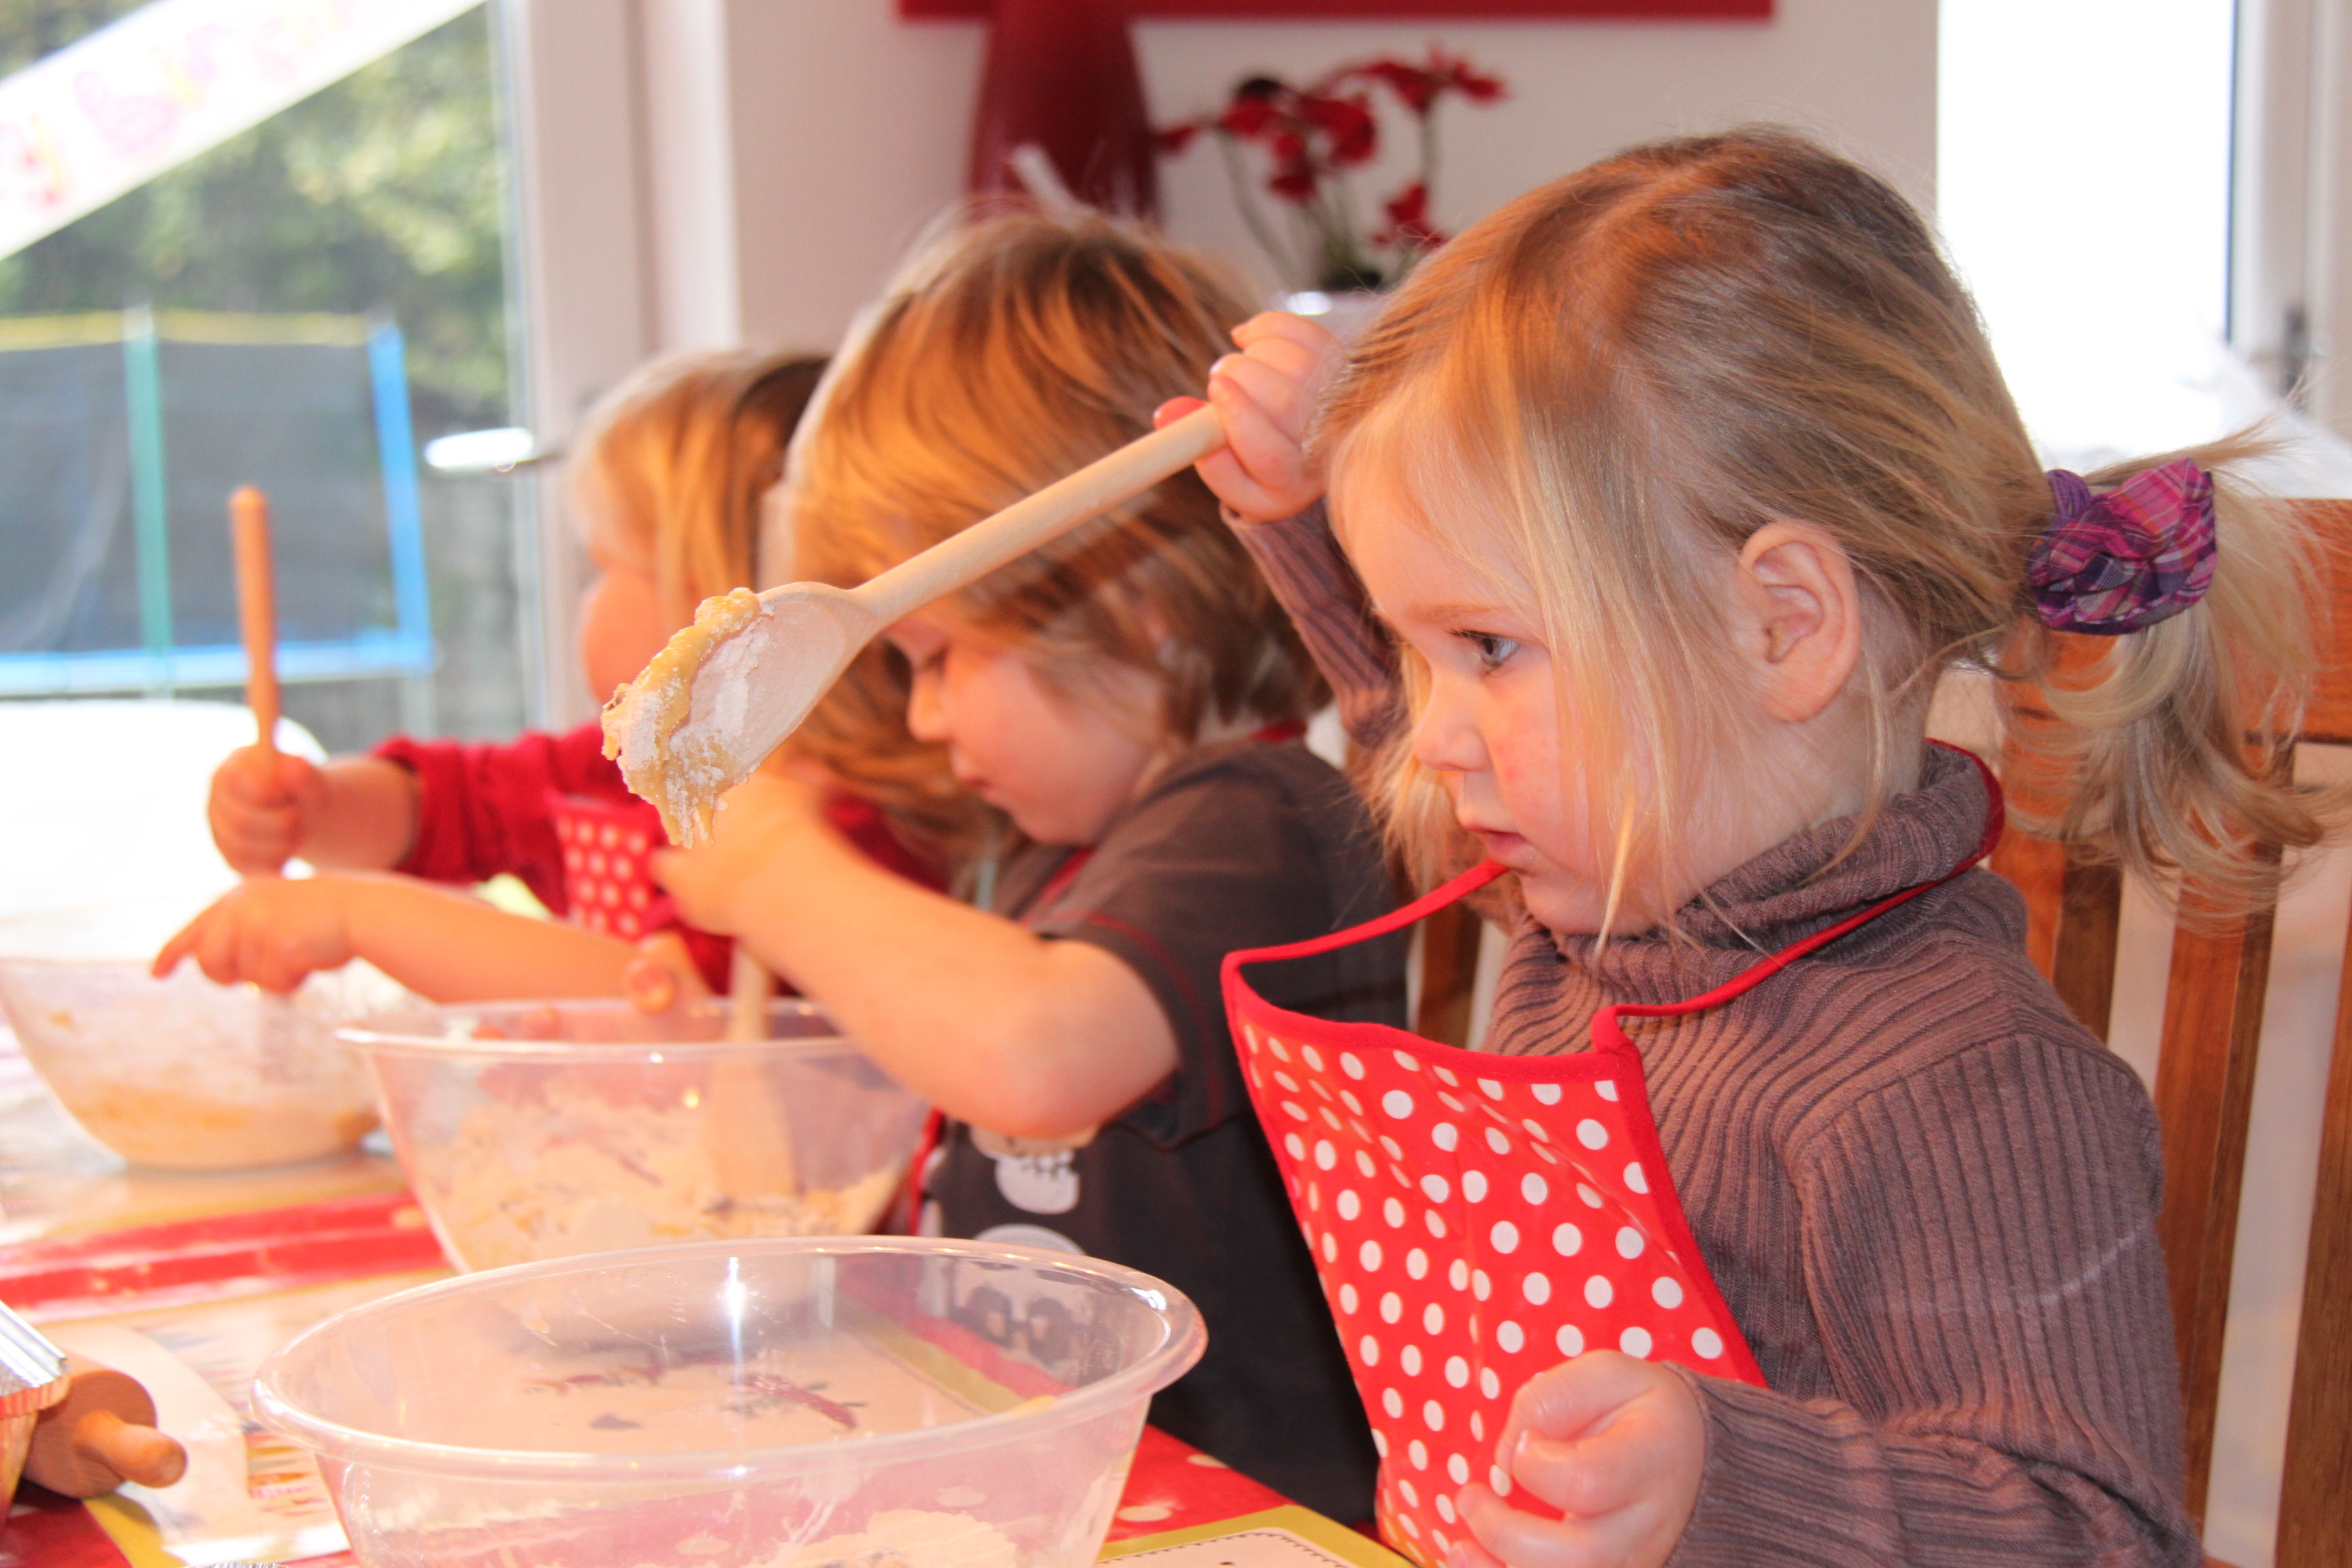 Cookery course for kids